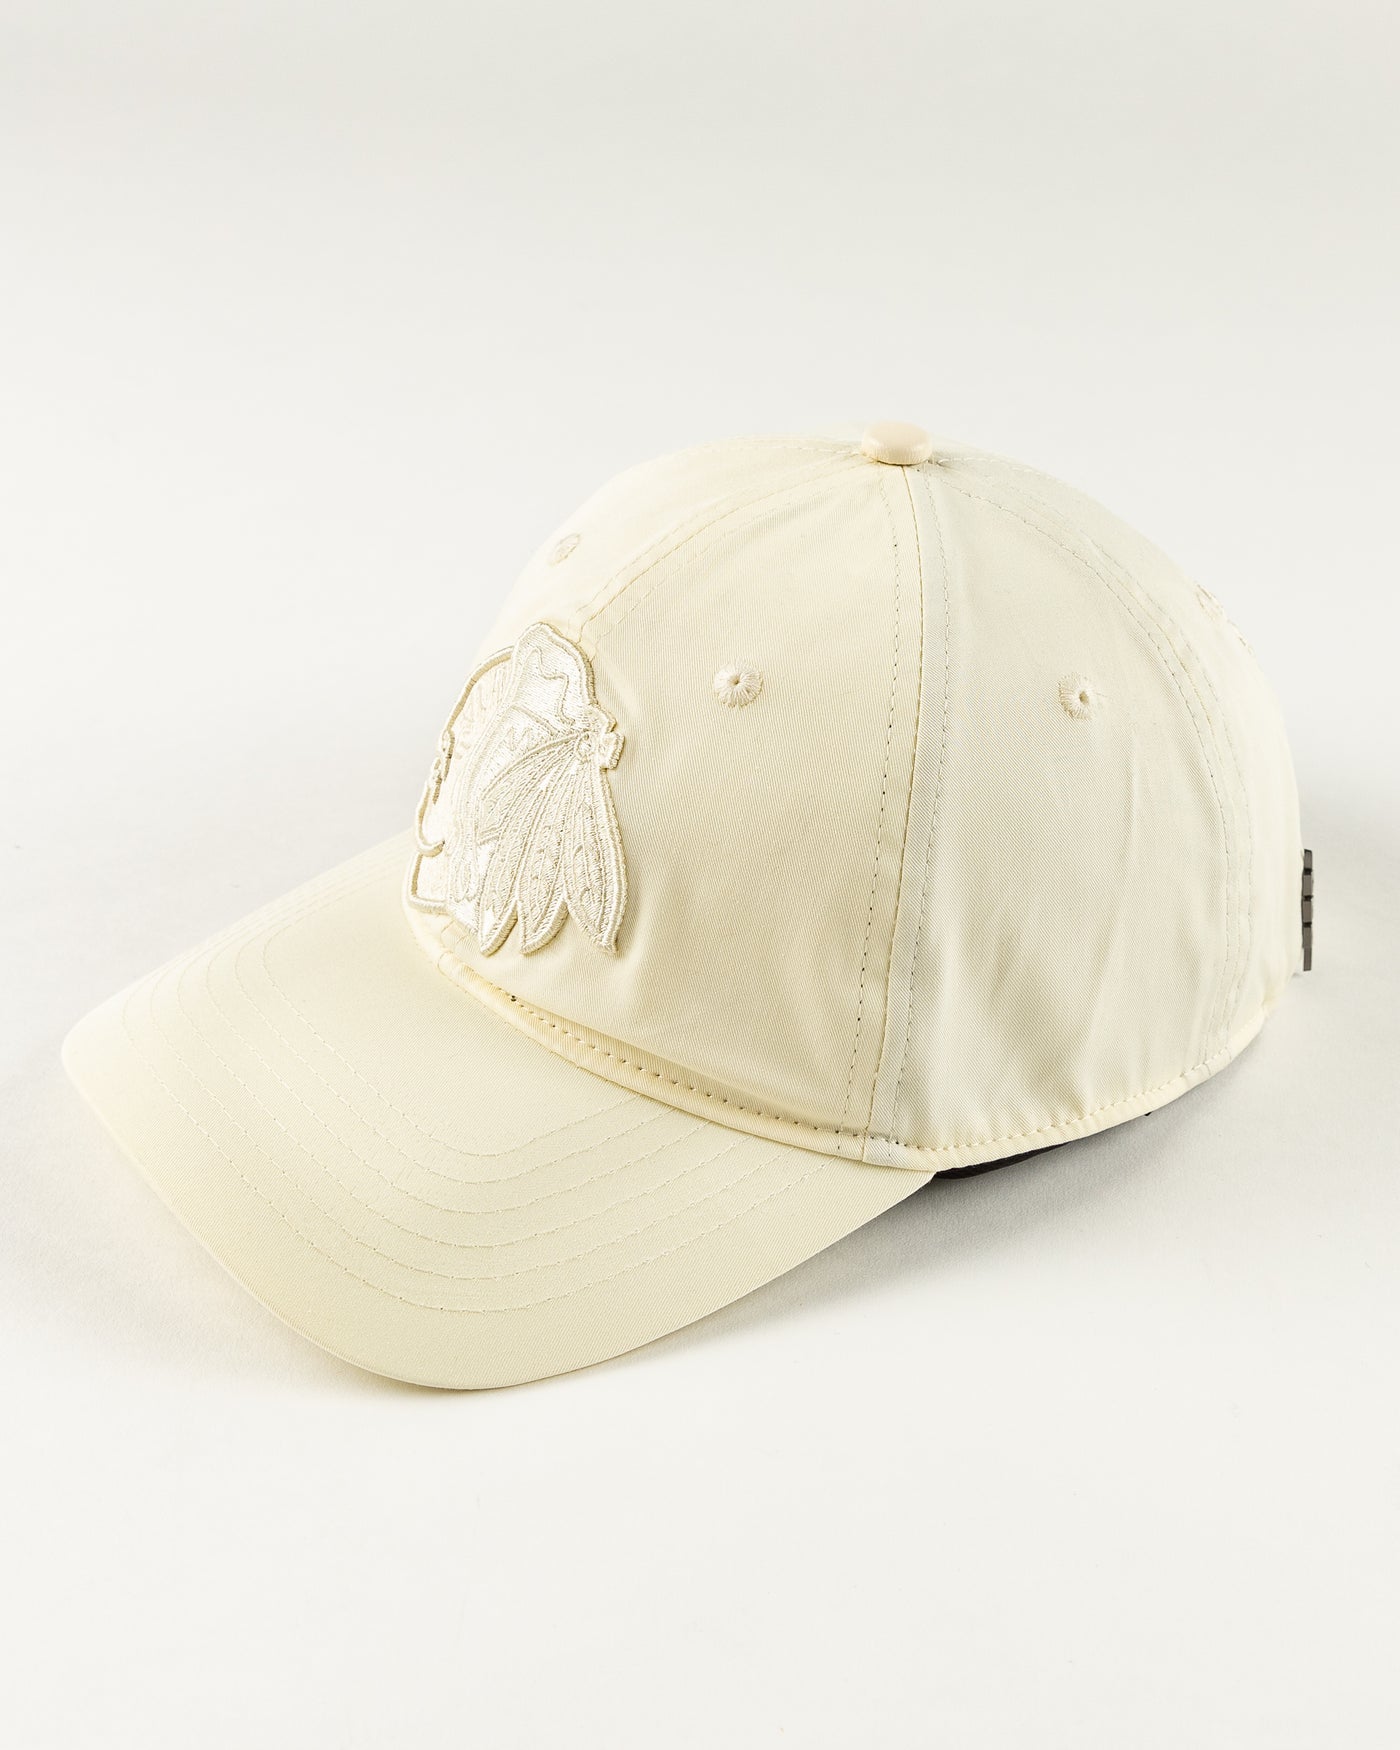 all eggshell adjustable cap with tonal Chicago Blackhawks primary logo embroidered on front - left angle lay flat 